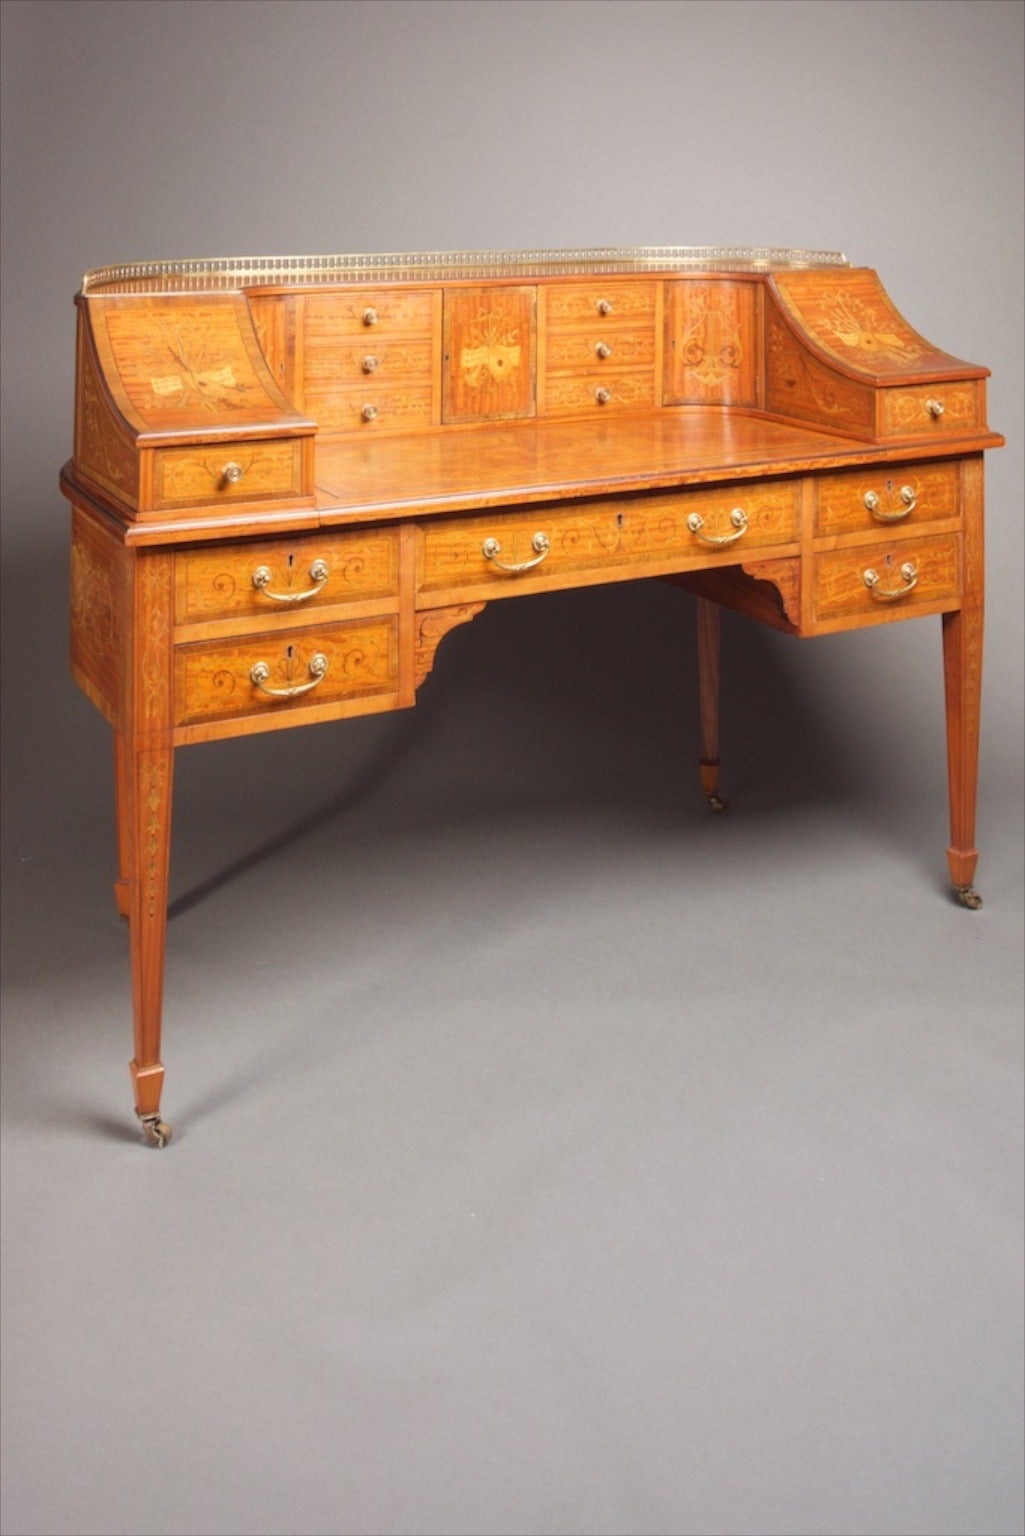 Georgian revival Carlton House desk, c 1890's. The original Carlton House desk was designed & made for the Prince Regent soon to be George IV for his London residence Carlton House. This is a high quality piece made from Ceylonese satinwood inlaid